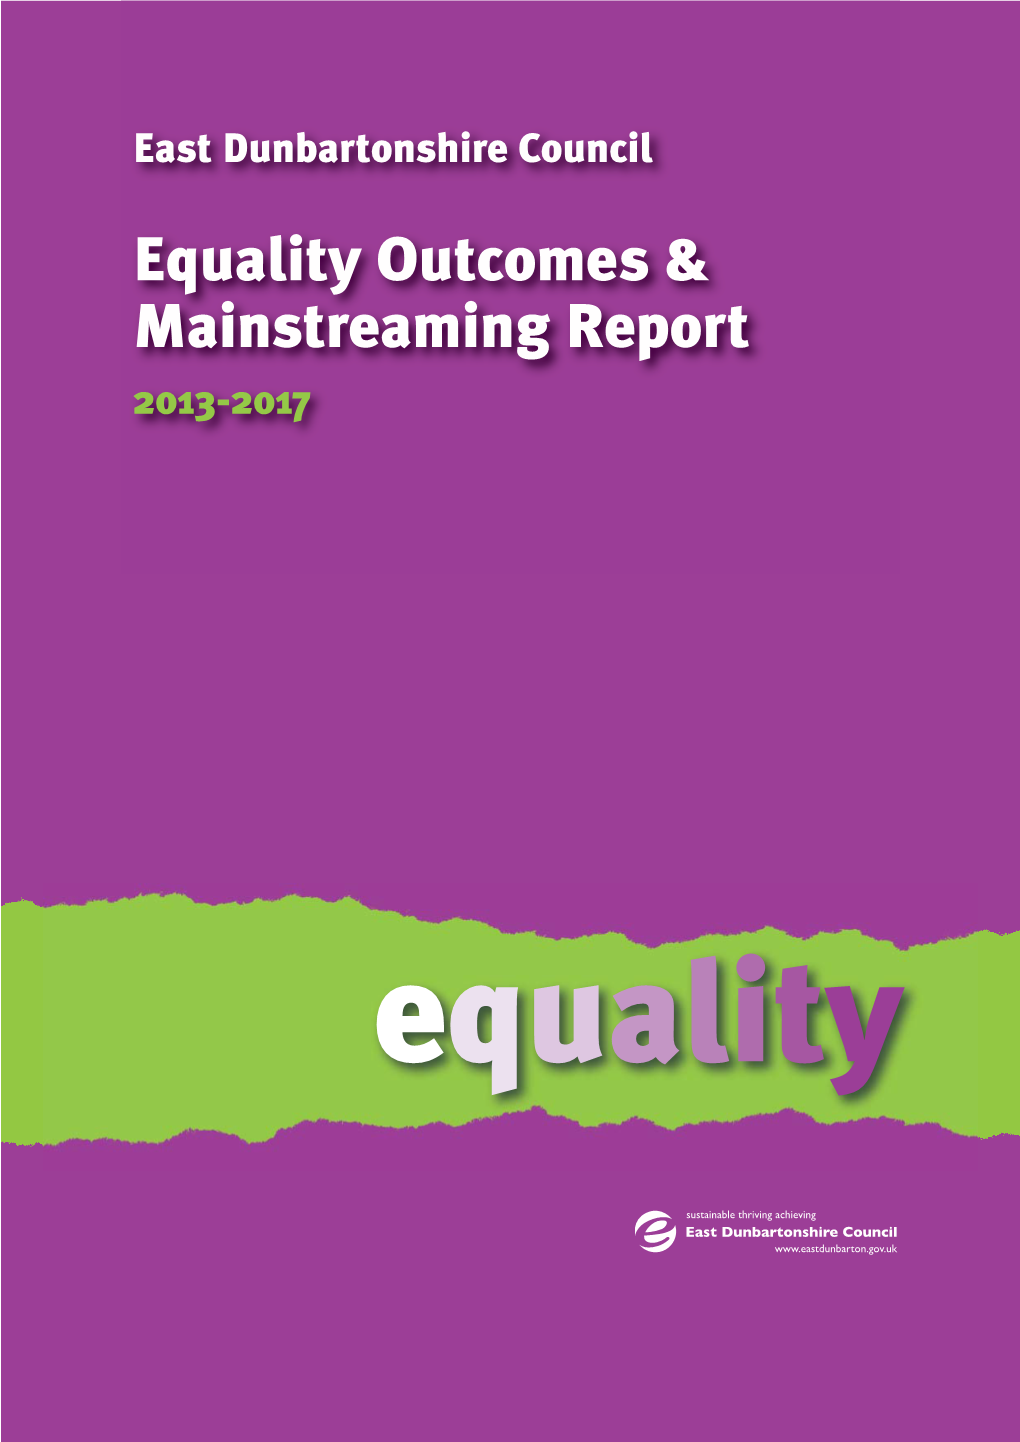 East Dunbartonshire Council Equality Outcomes & Mainstreaming Report 2013-2017